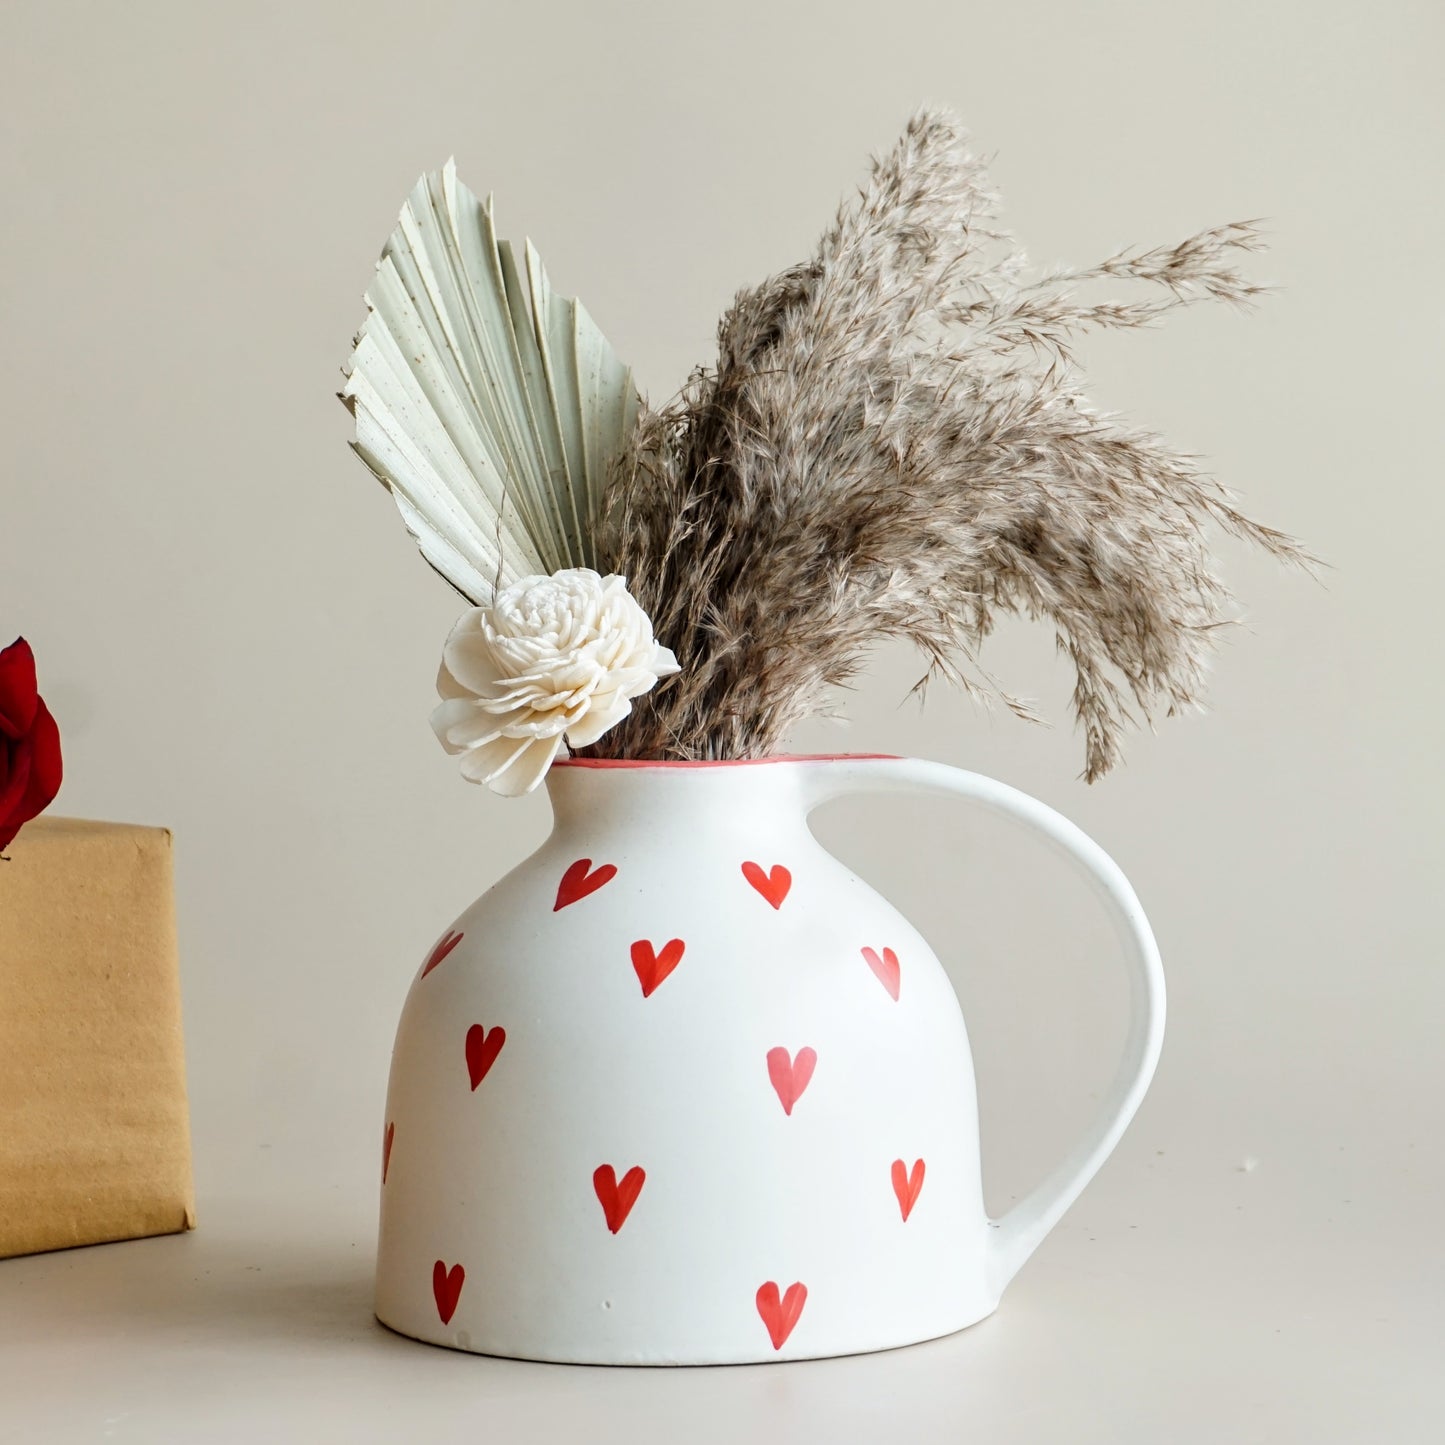 You Stole My Heart Vase With Dried Leaves